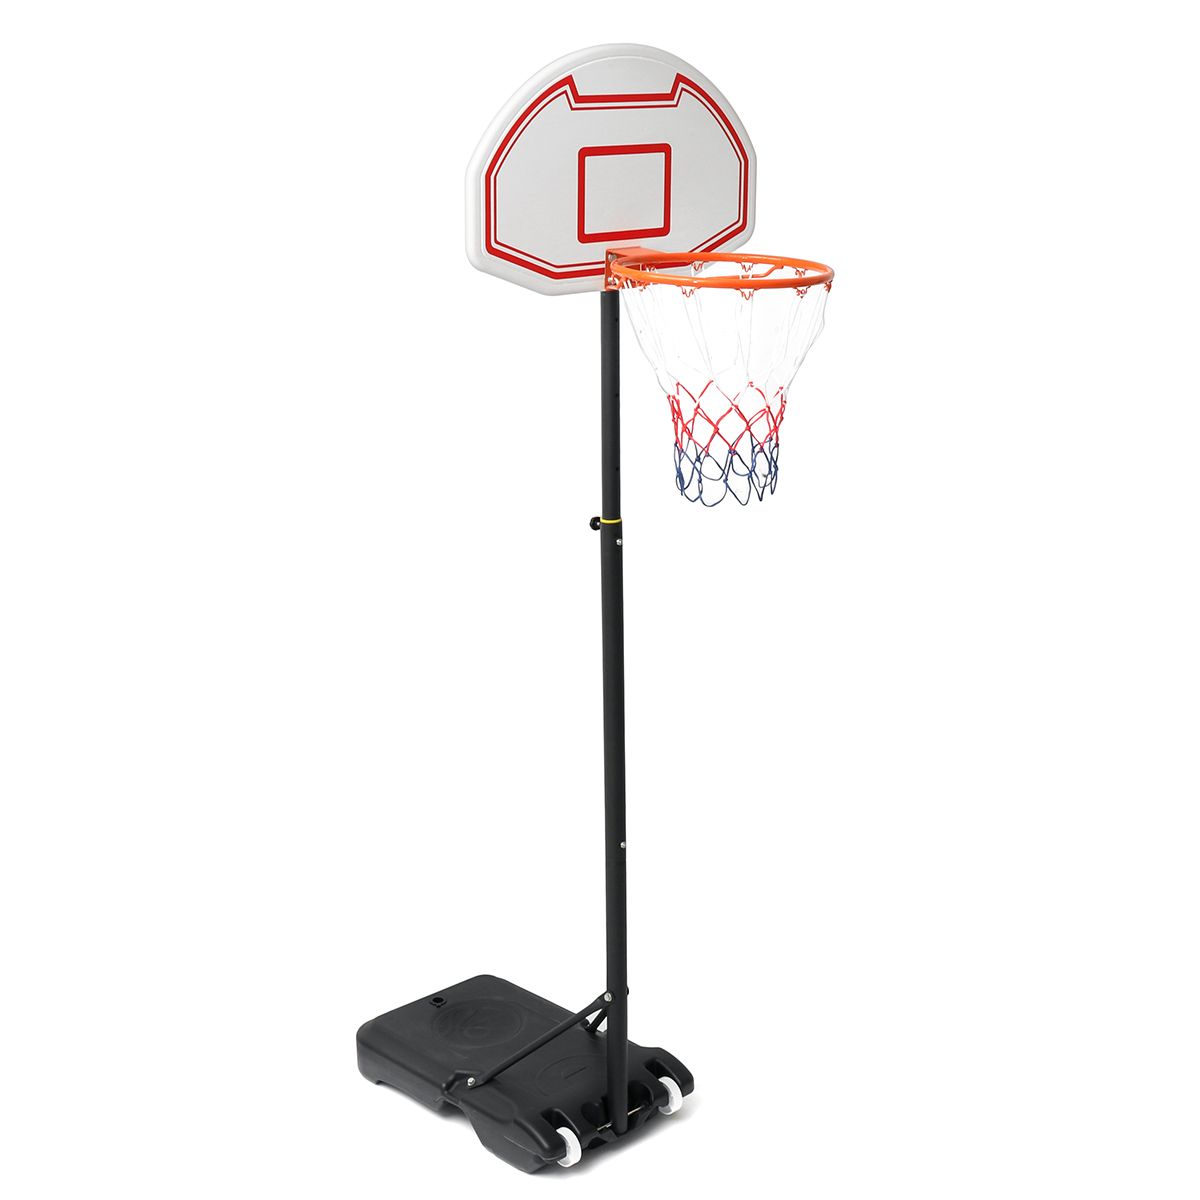 155-210cm-Adjustable-Child-Outdoor-Play-Sports-Basketball-Board-Hoop-amp-Net-Sets-with-Stand-1715143